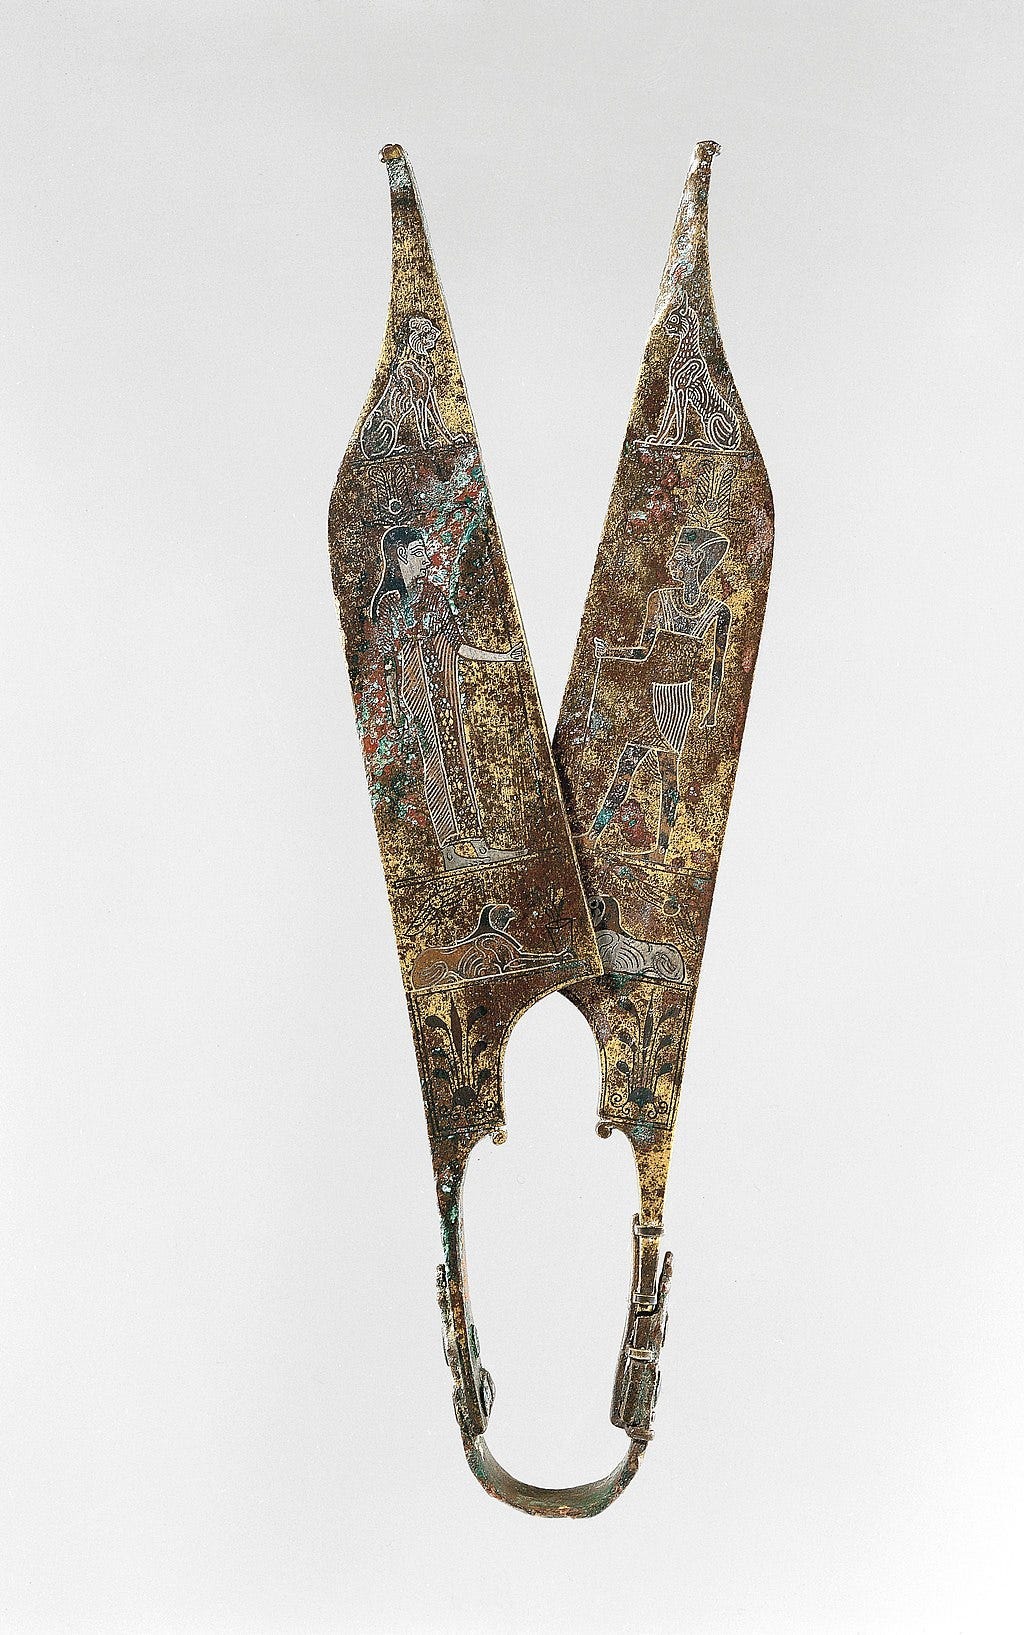 Scissors from Ancient Egypt with various colorful images dating back to the 5th millennium BC